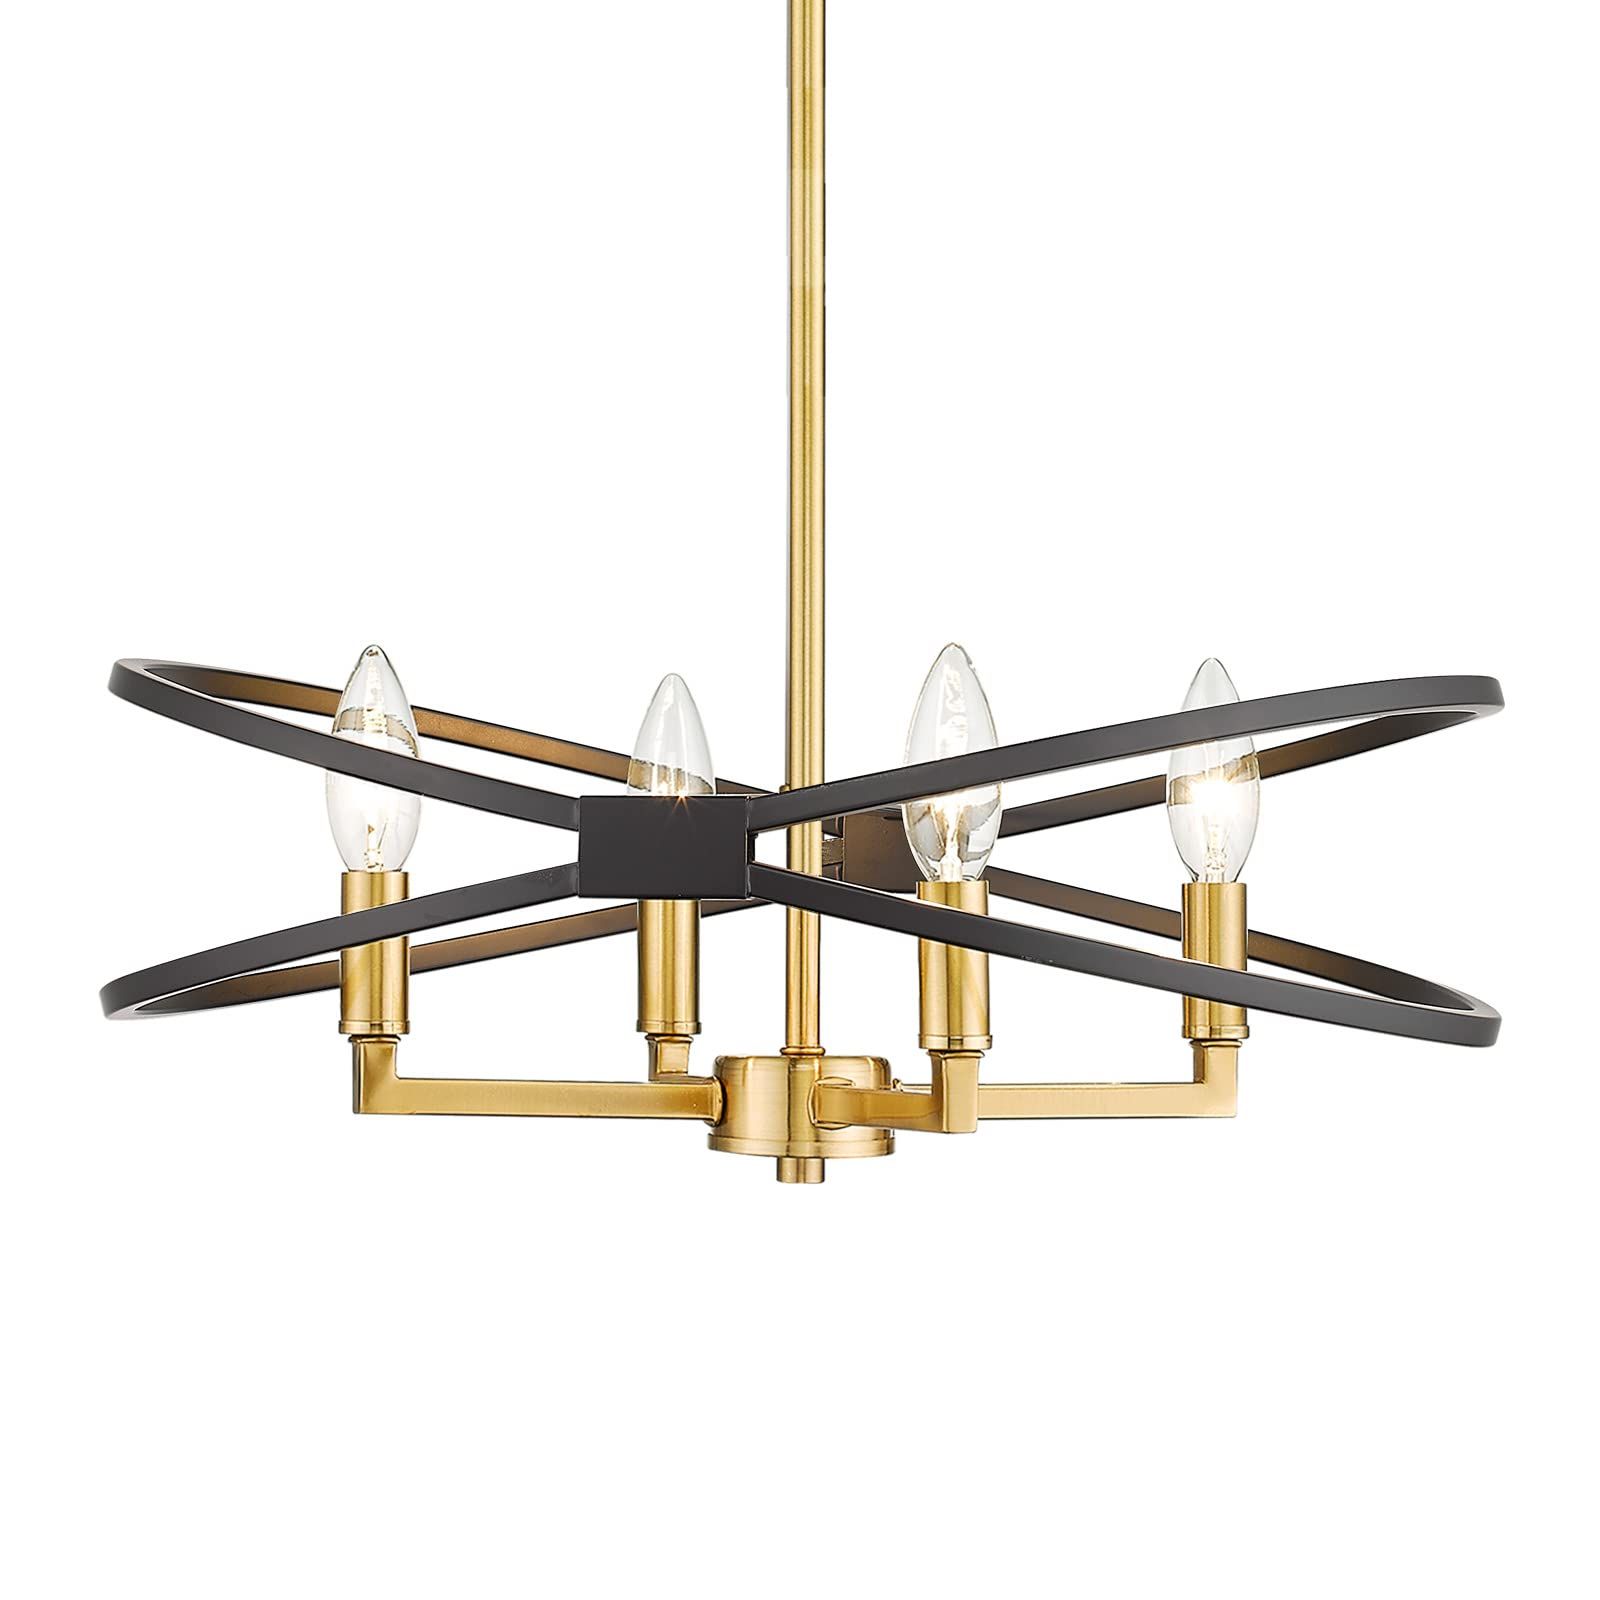 Emliviar 4 Light Farmhouse Chandelier – 18 Inch Modern Lantern Pendant  Light For Bedroom Dining Room, Black And Gold Finish, Ye243p 4 Bk+bg – –  Amazon Intended For Most Current 18 Inch Lantern Chandeliers (View 3 of 10)